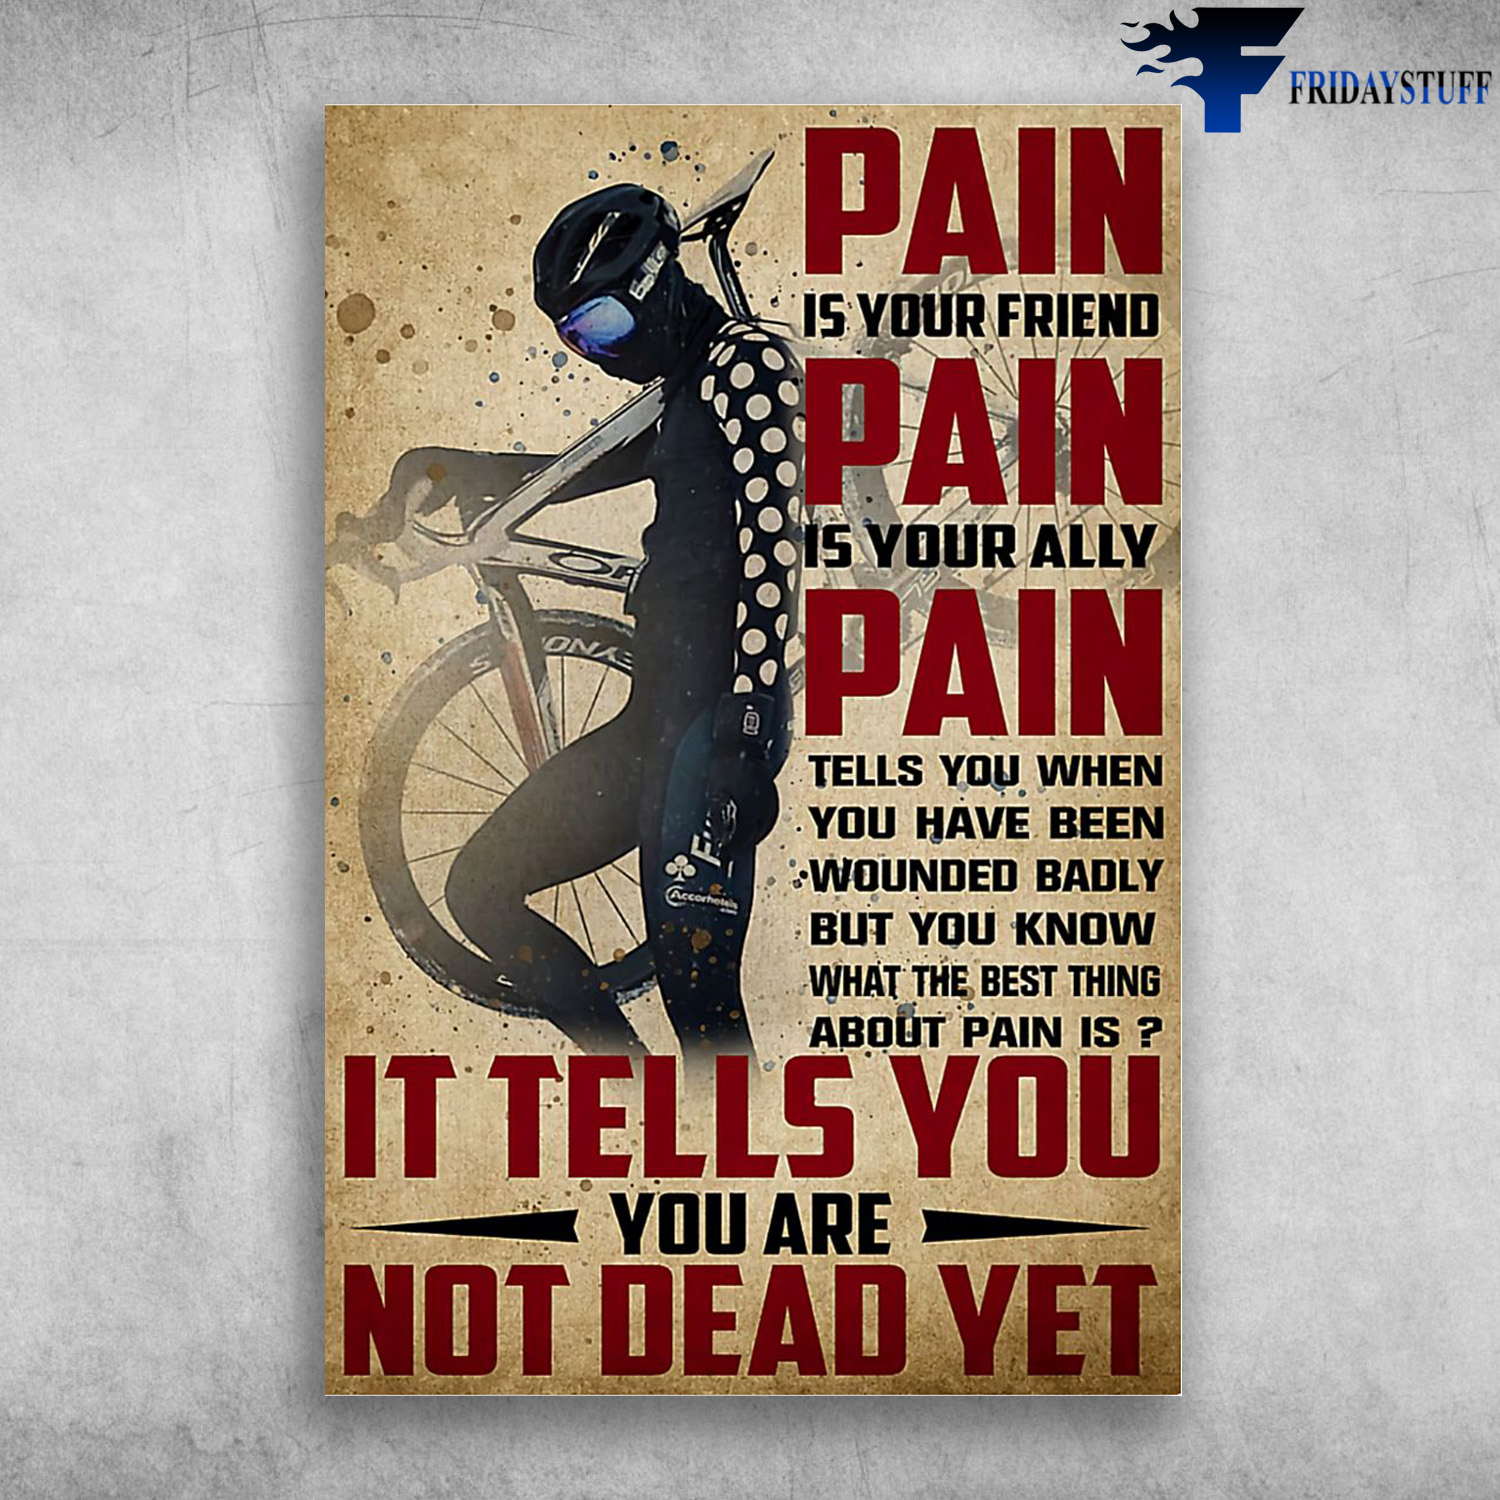 Biker Man - Pain Is Your Friend, PainIs Your Ally Pain, Tells You When You Have Been Wounded Badly